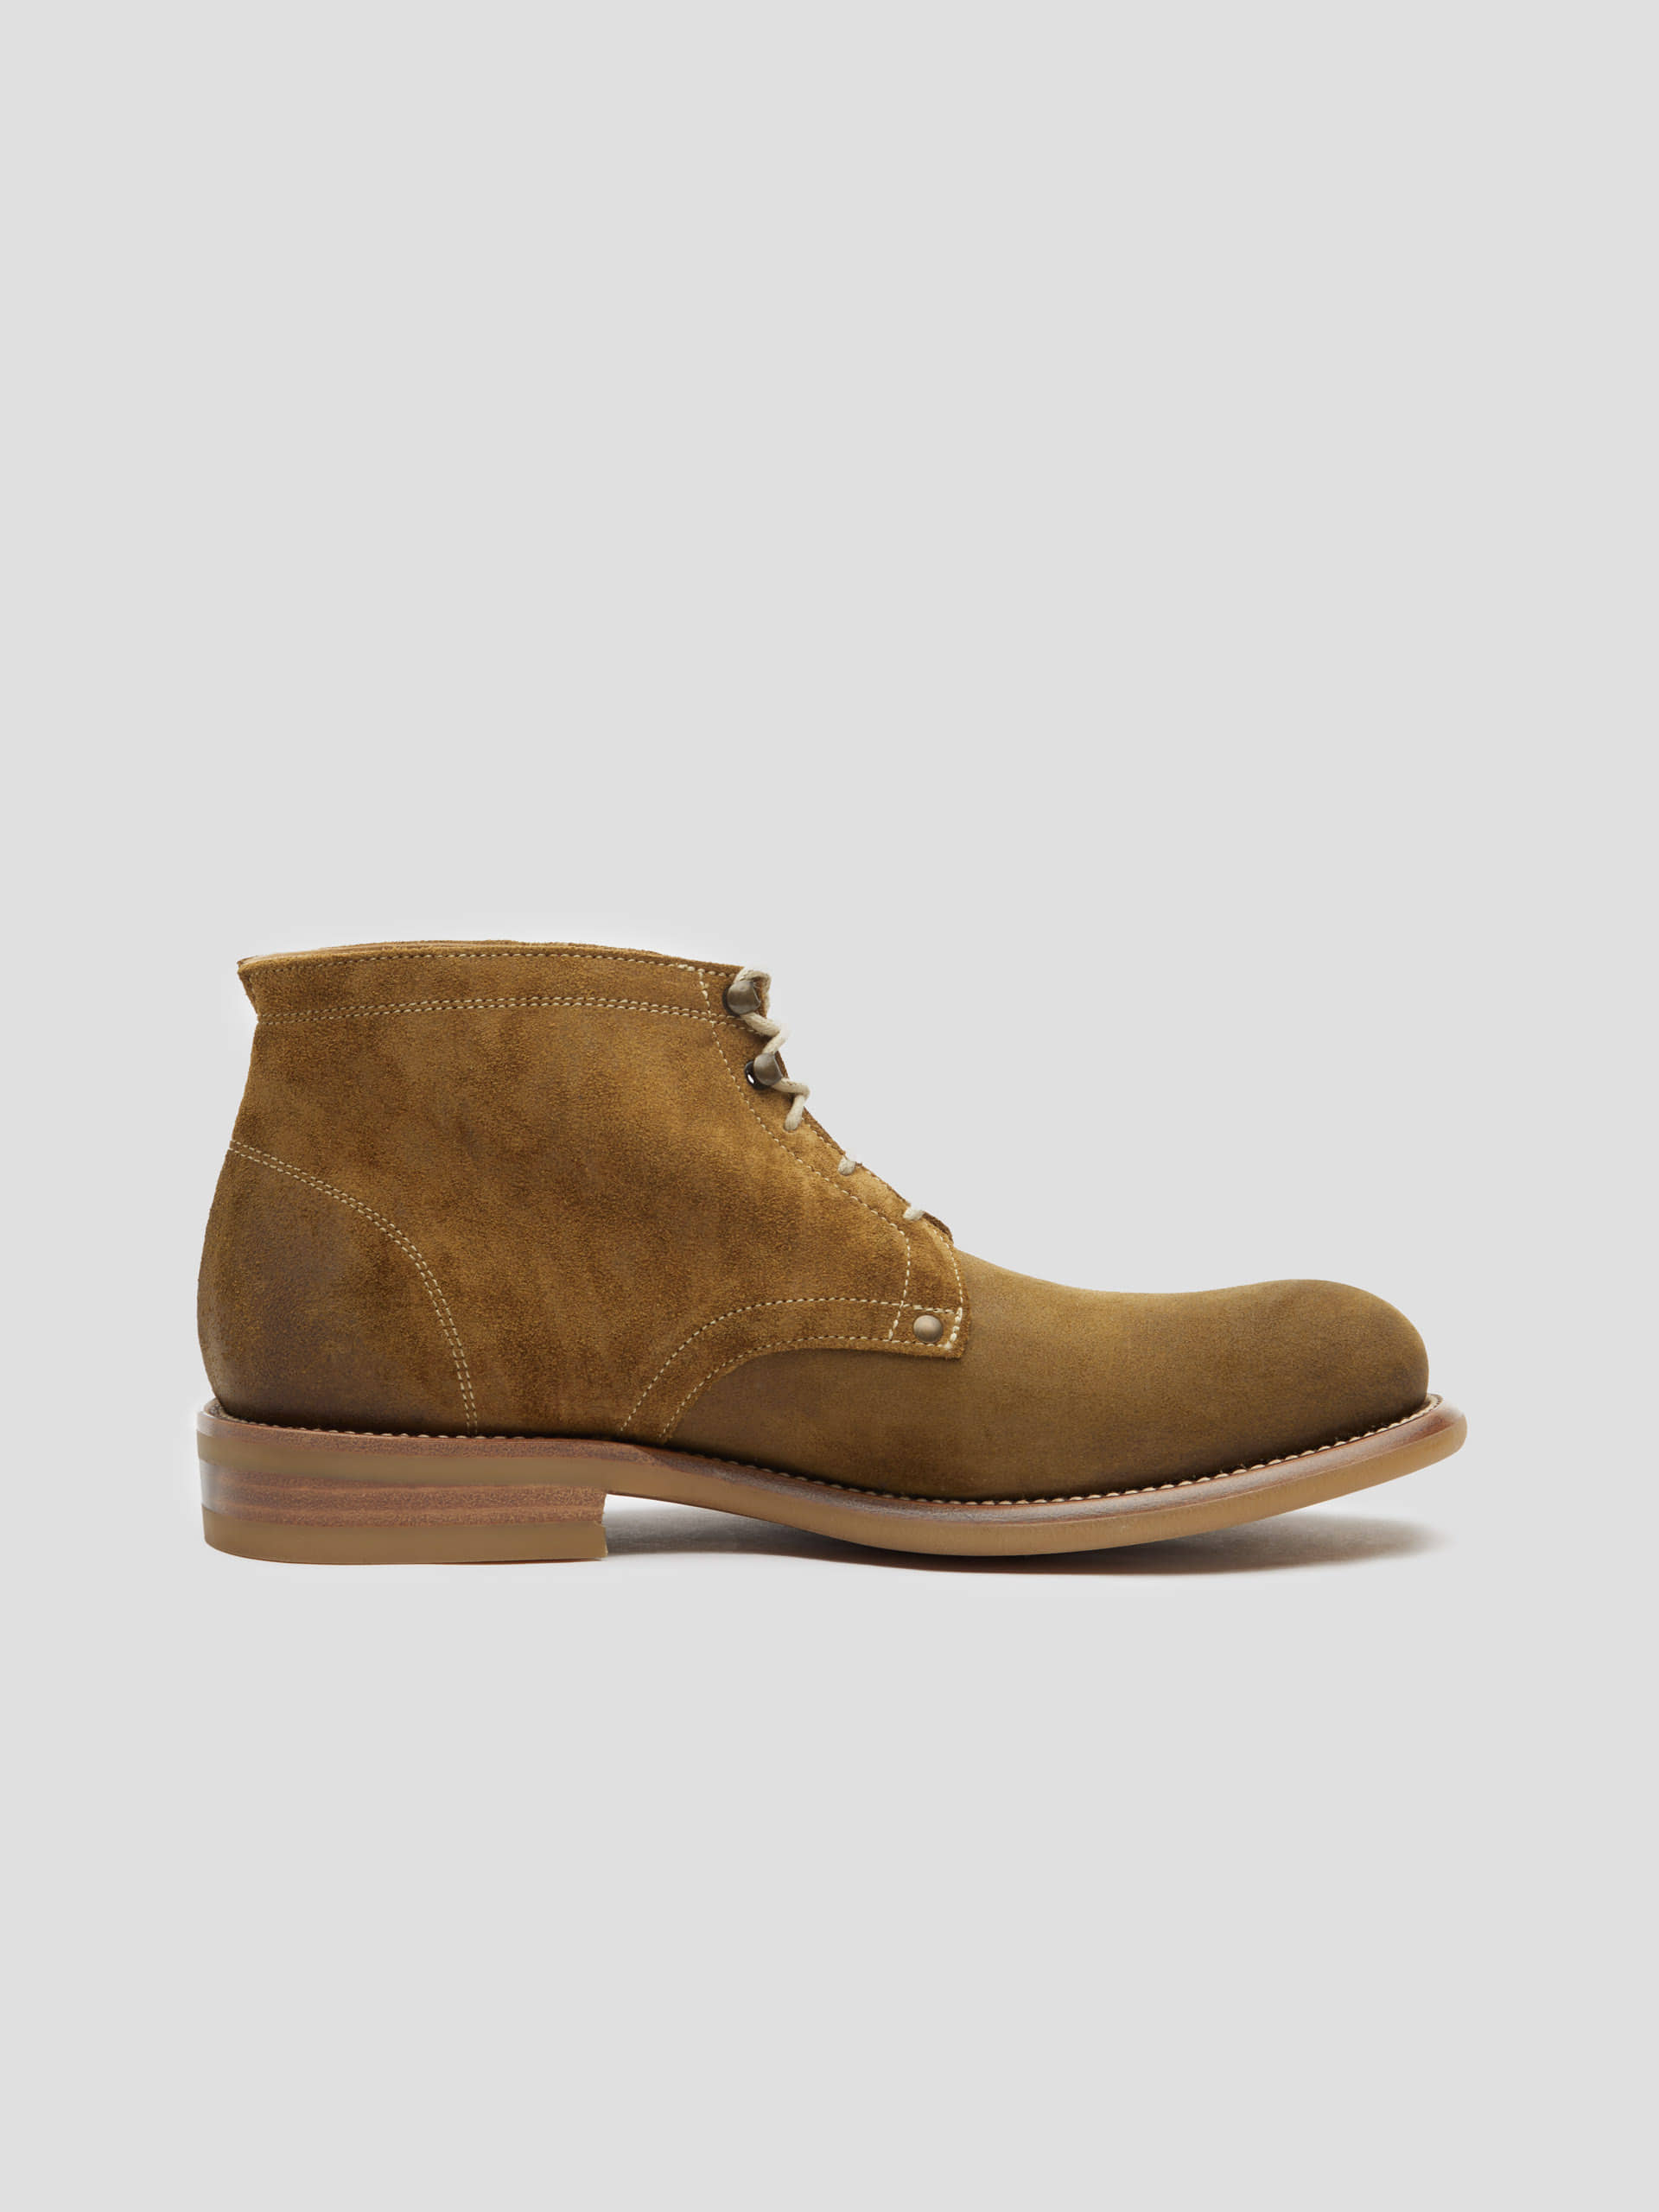 boots 02 suede olive drab (only for men) 스니커즈와 구두